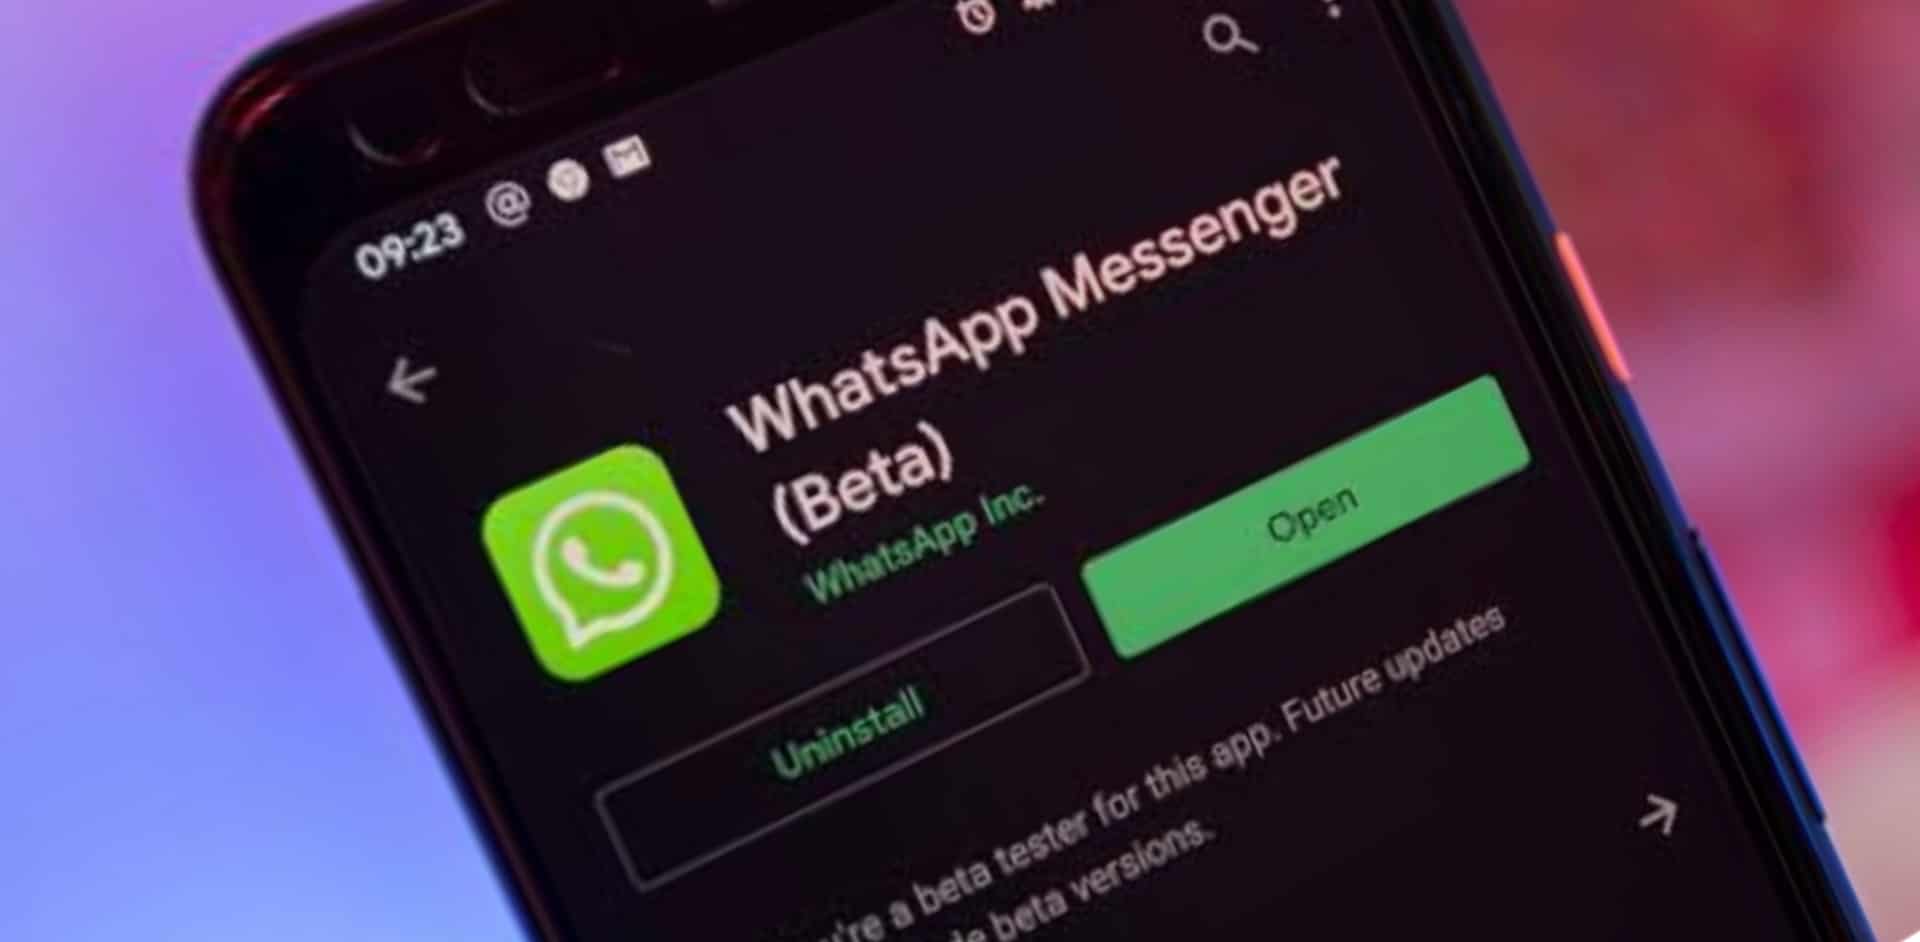 WhatsApp Could Soon Add Self-destructing Photos Feature in Future Update